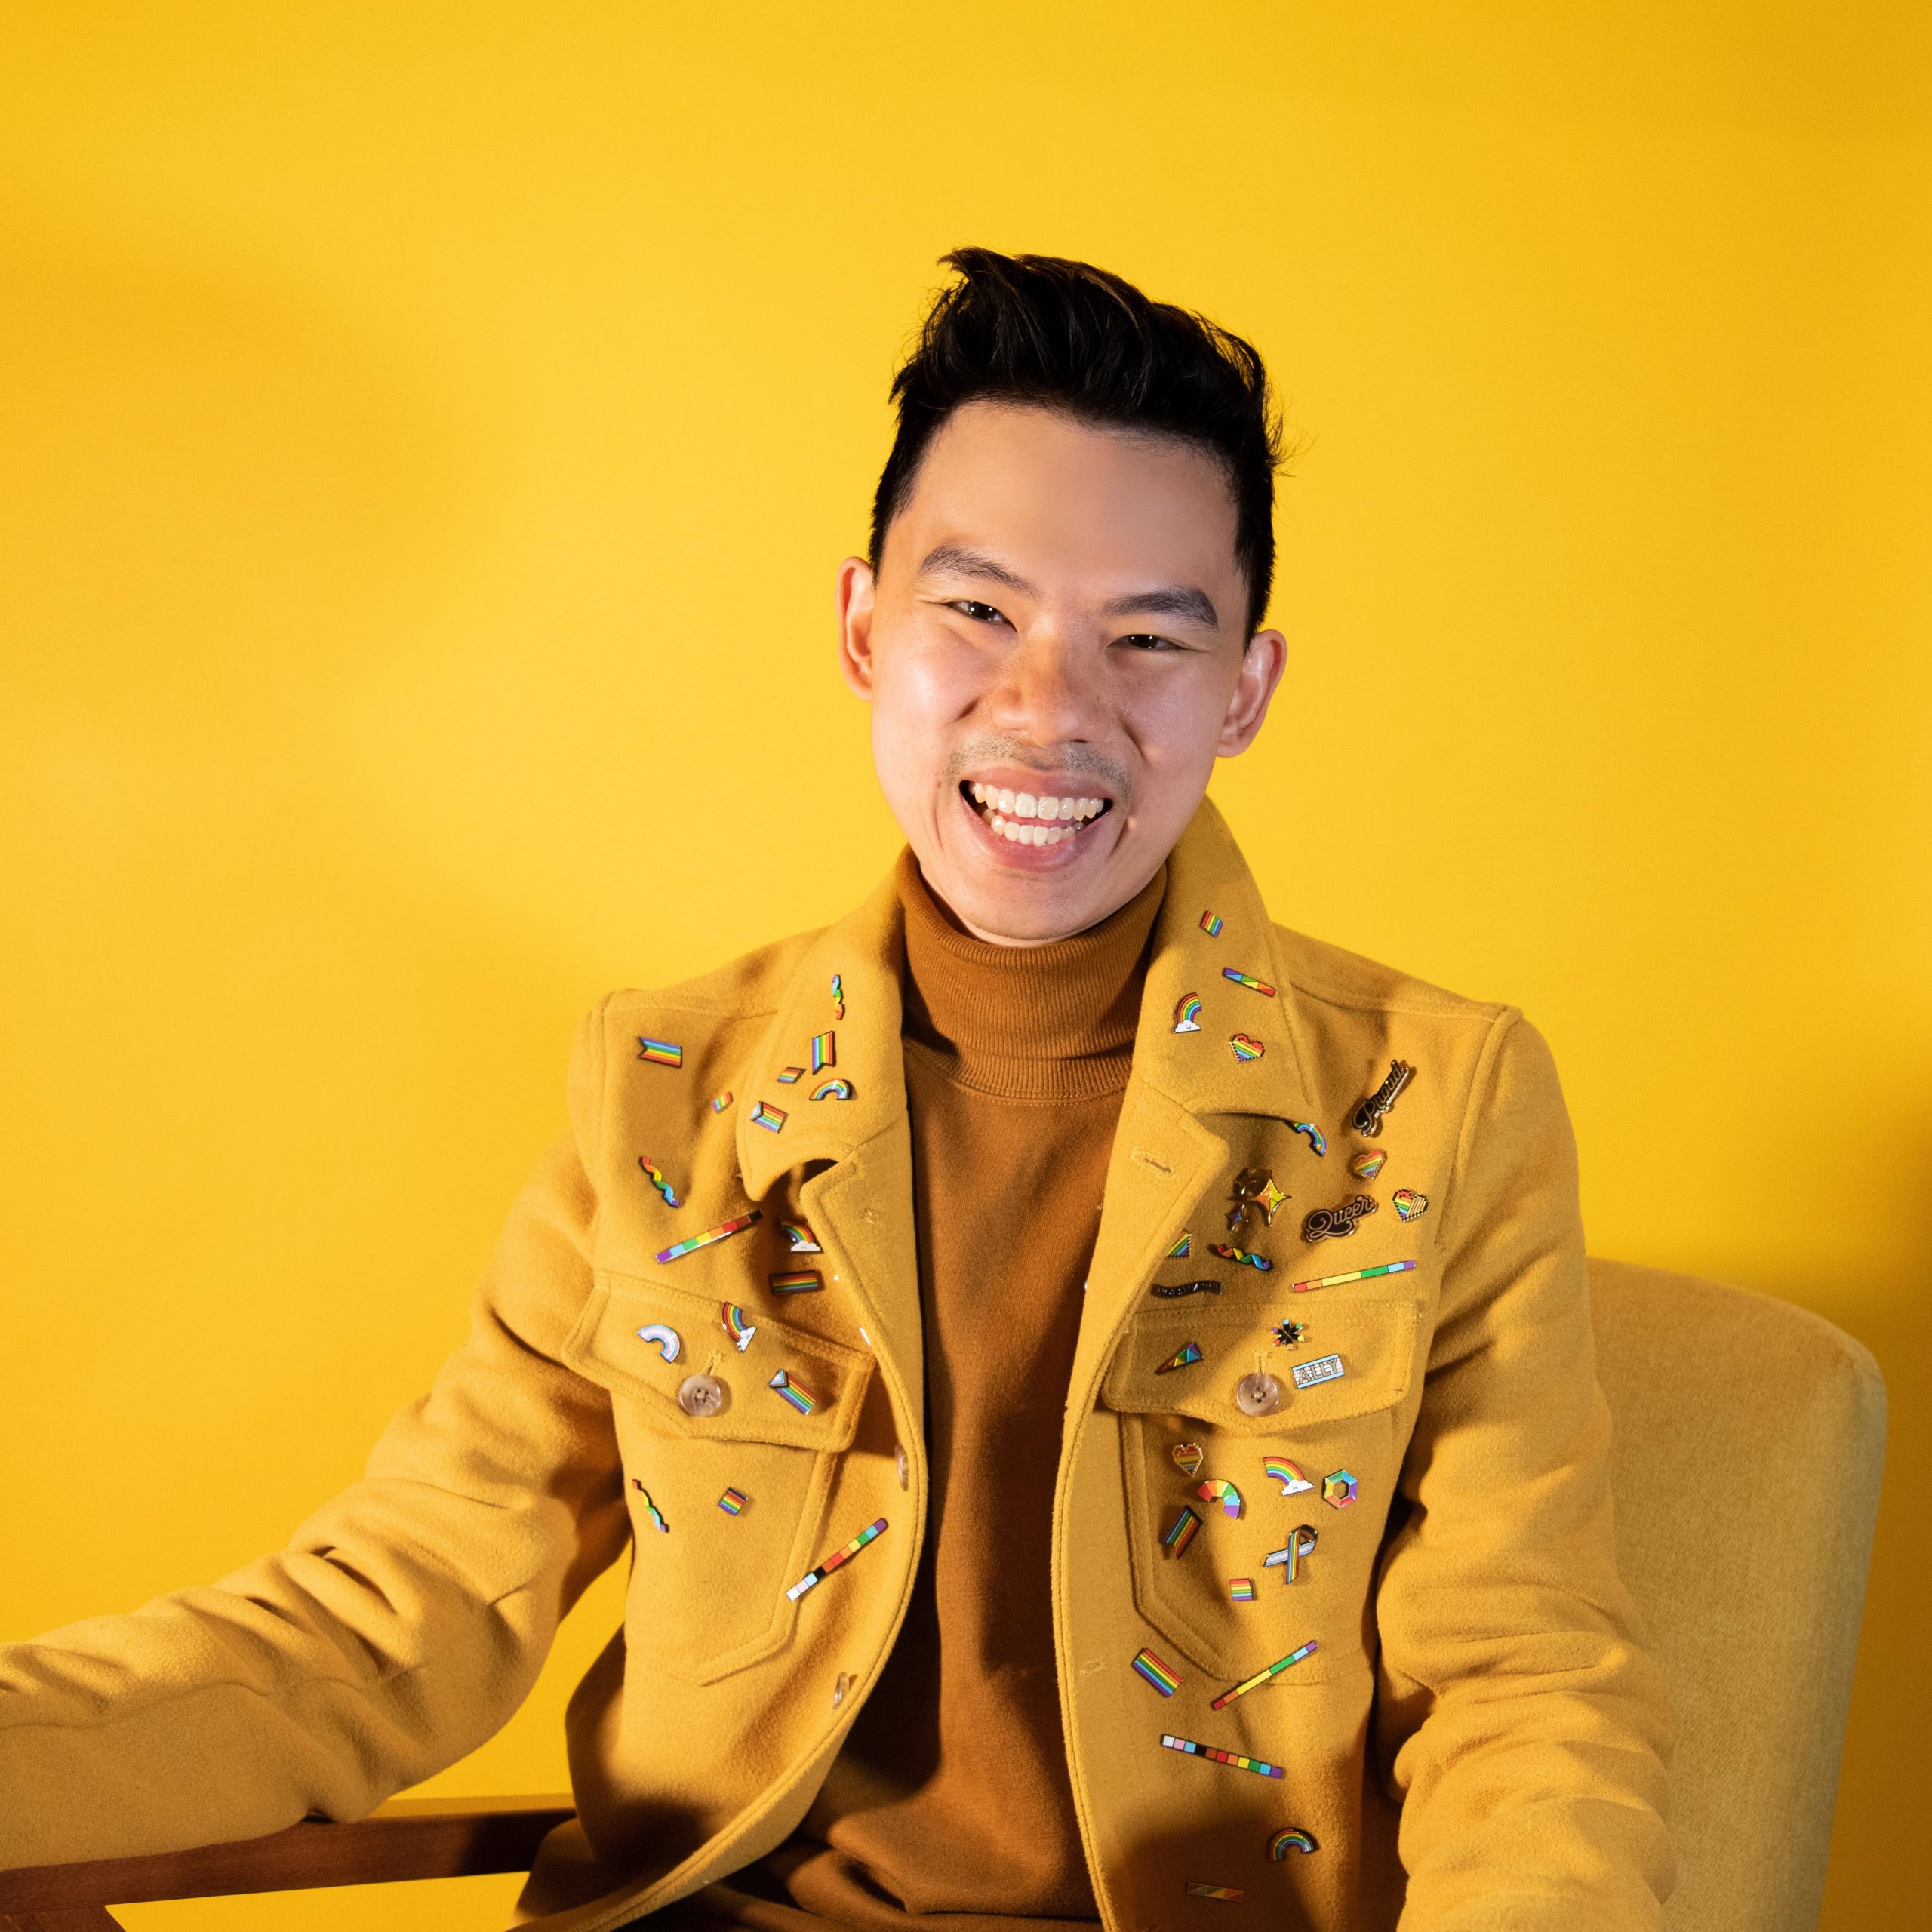 photo of Zar, a smiling Singaporean-British man with short black hair. He is wearing a yellow blazer with tons of pride pins over a darker yellow sweater. behind him is a yellow background.